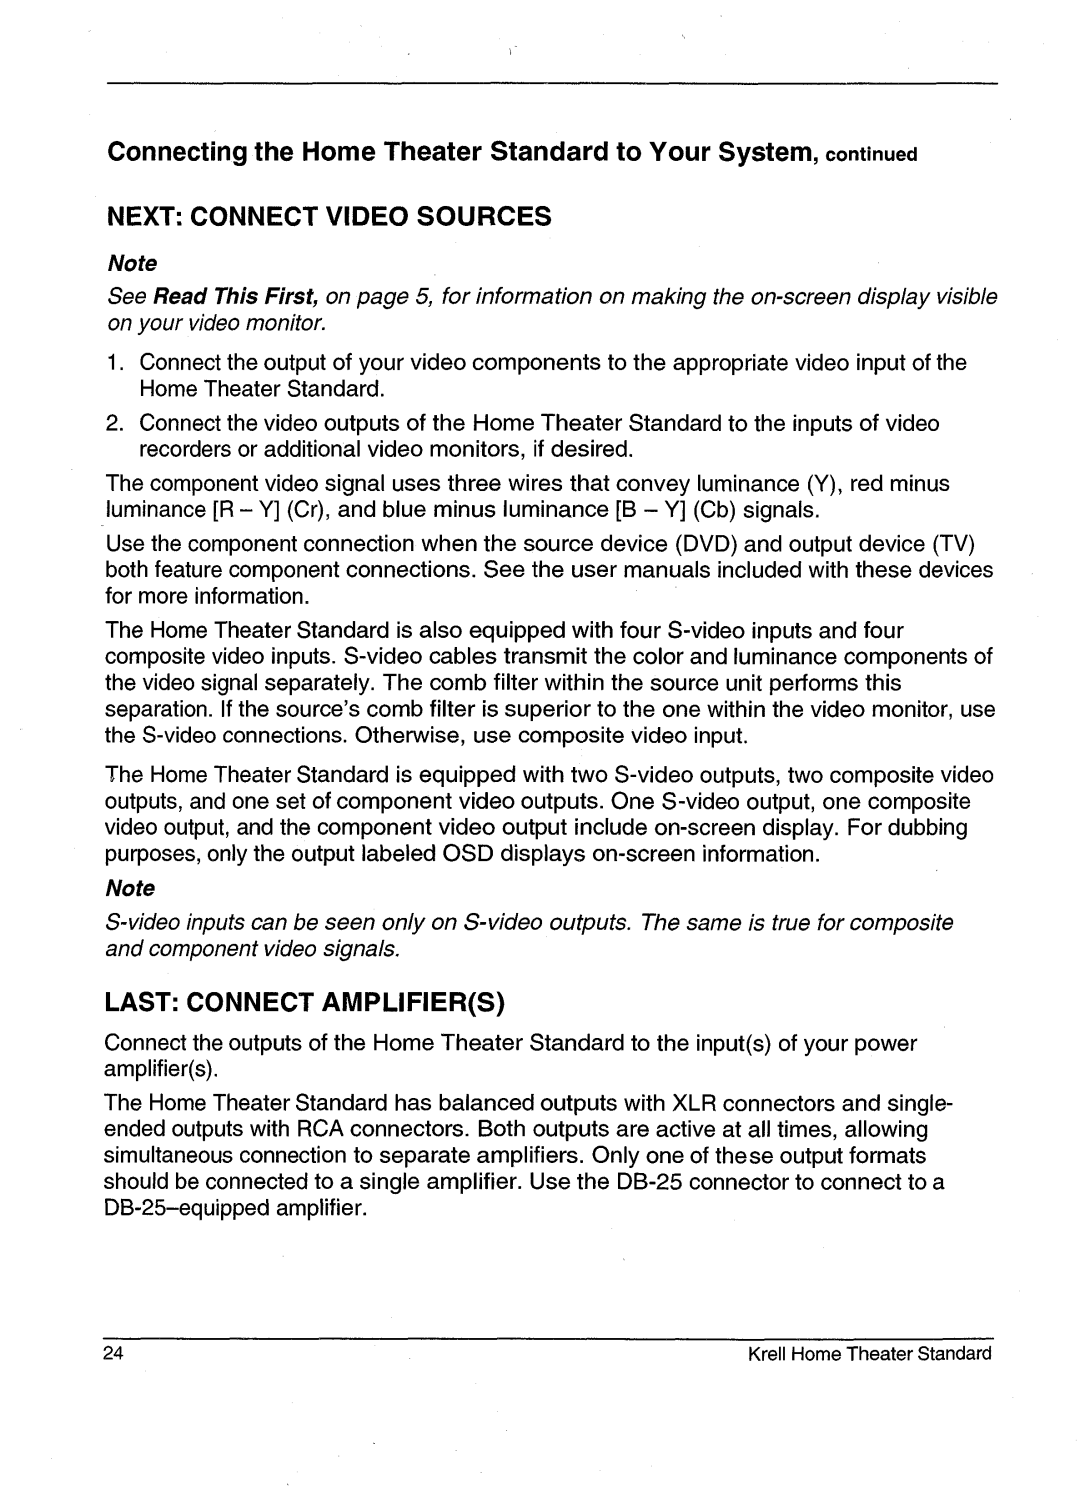 Krell Industries HTS 2 manual Next: Connectvideo Sources, Last: Connectamplifiers 